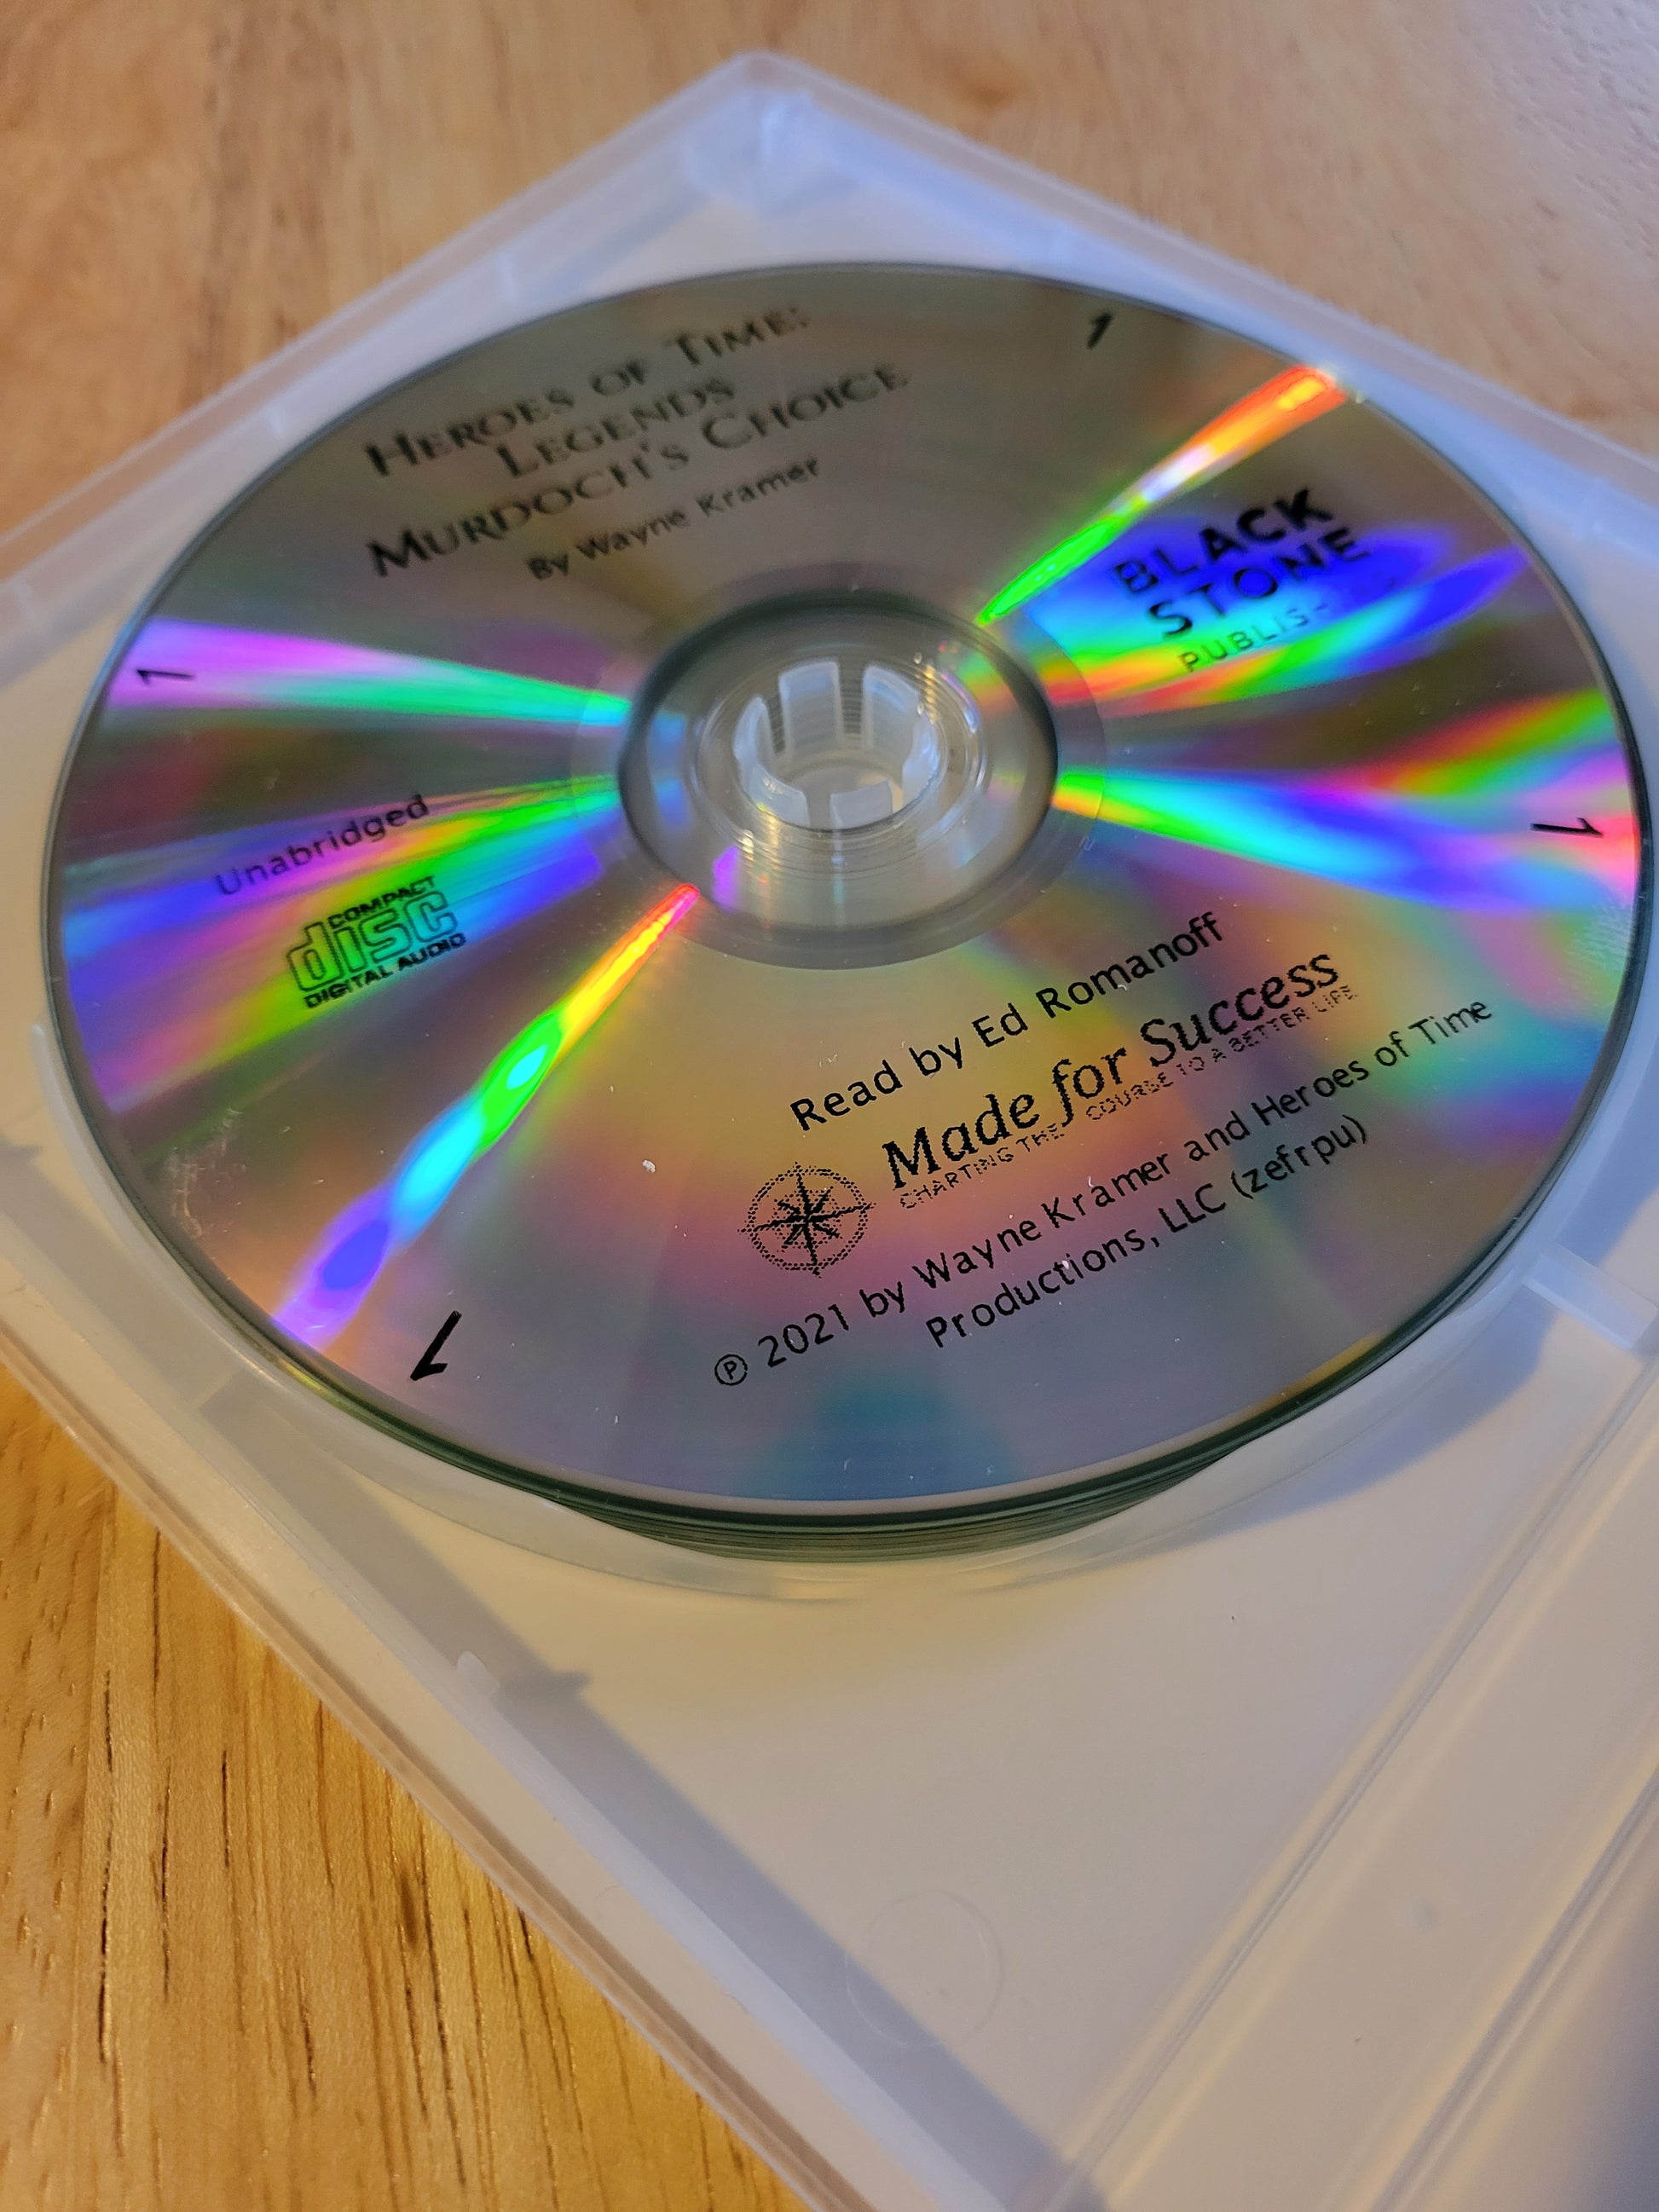 Murdoch's Choice Audiobook CD Set opened to show discs